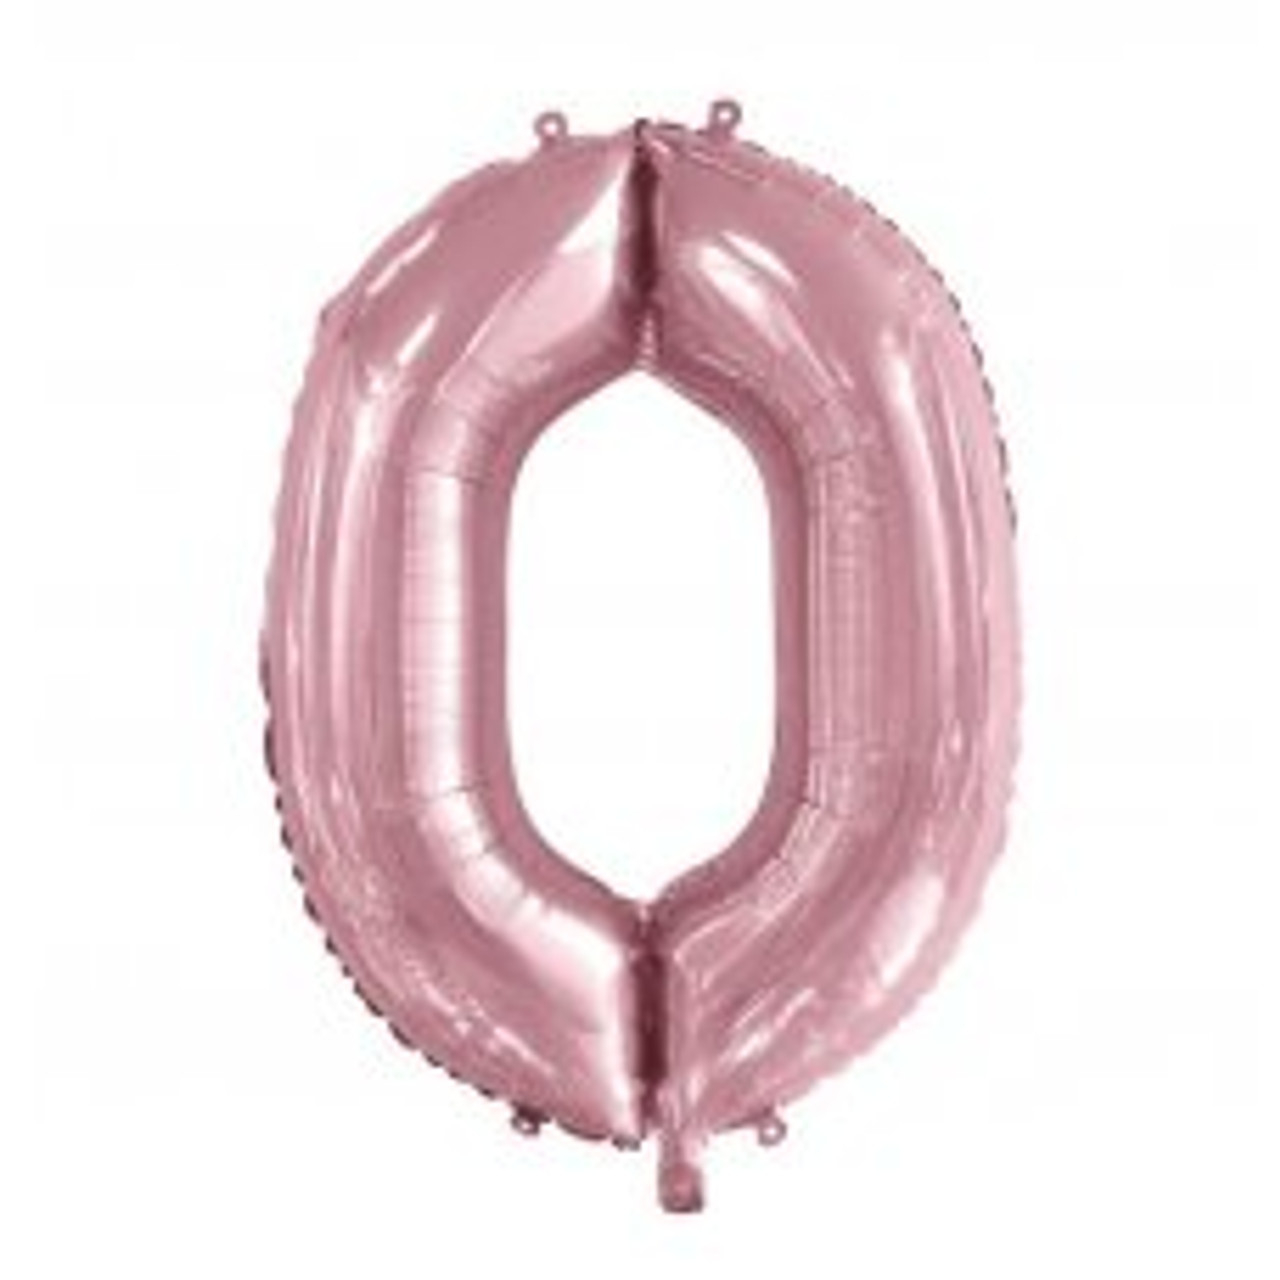 213760 0 NUMERAL LIGHT PINK FOIL BALLOON 87CM/34 INCH . INC HELIUM, WEIGHT, RIBBON